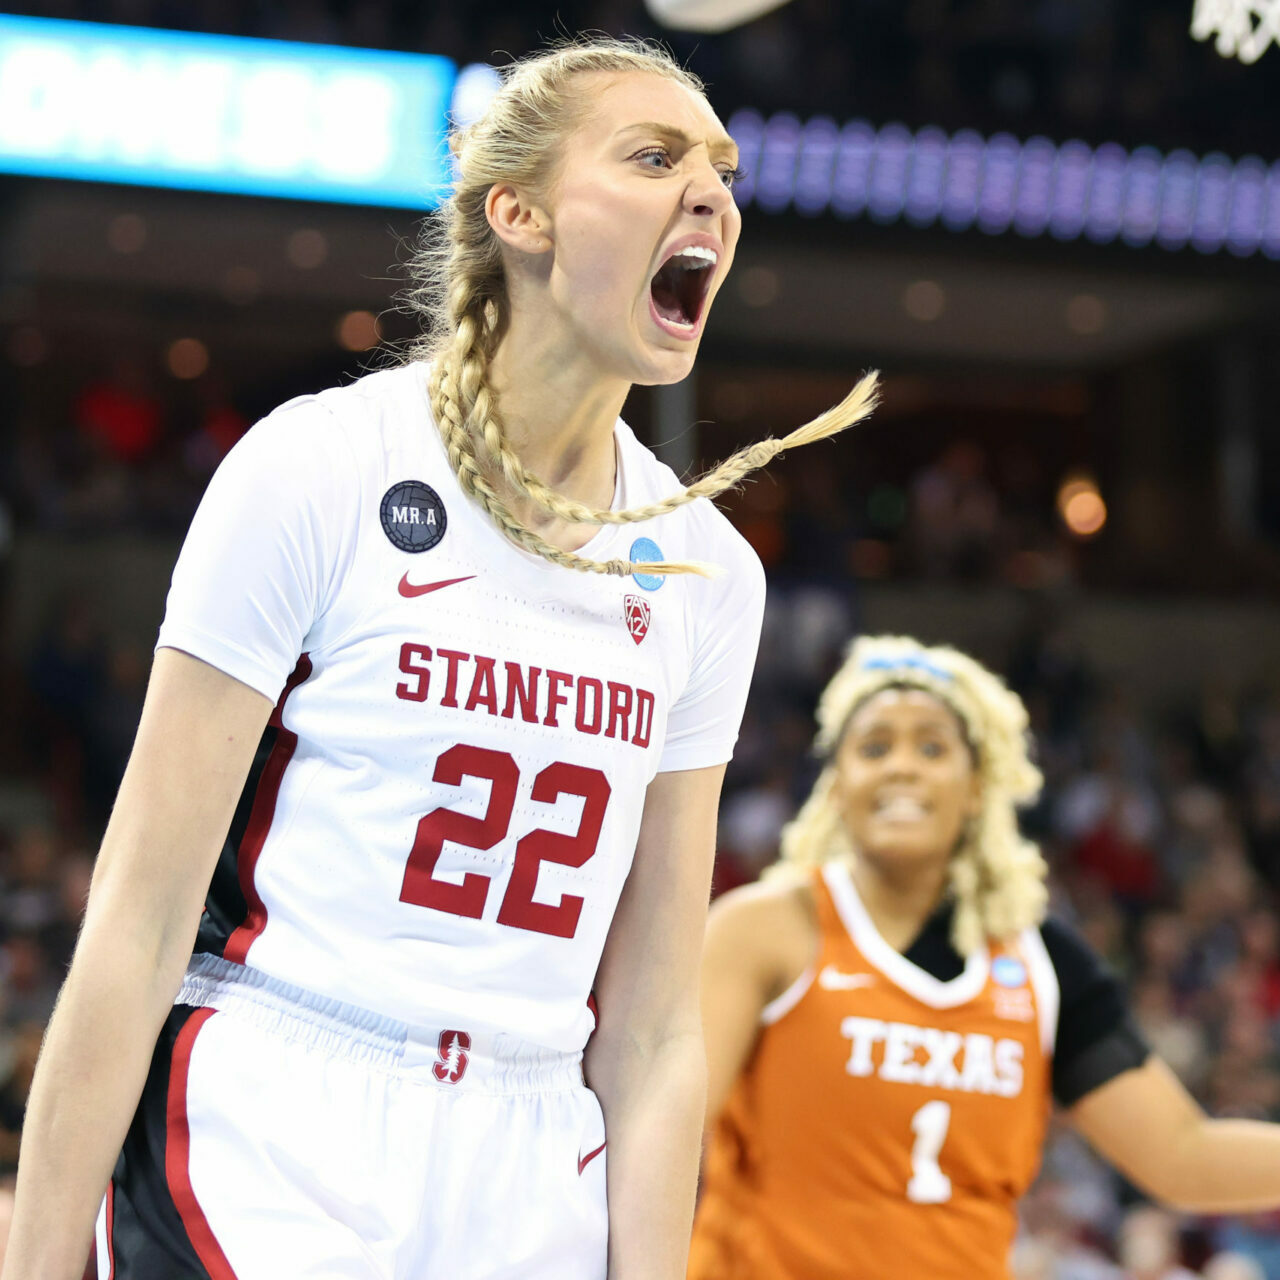 SPOKANE, WASHINGTON - MARCH 27: Cameron Brink #22 of the Stanford Cardinal celebrates during the third quarter against the Texas Longhorns in the NCAA Women's Basketball Tournament Elite 8 Round at Spokane Veterans Memorial Arena on March 27, 2022 in Spokane, Washington. (Photo by Abbie Parr/Getty Images)